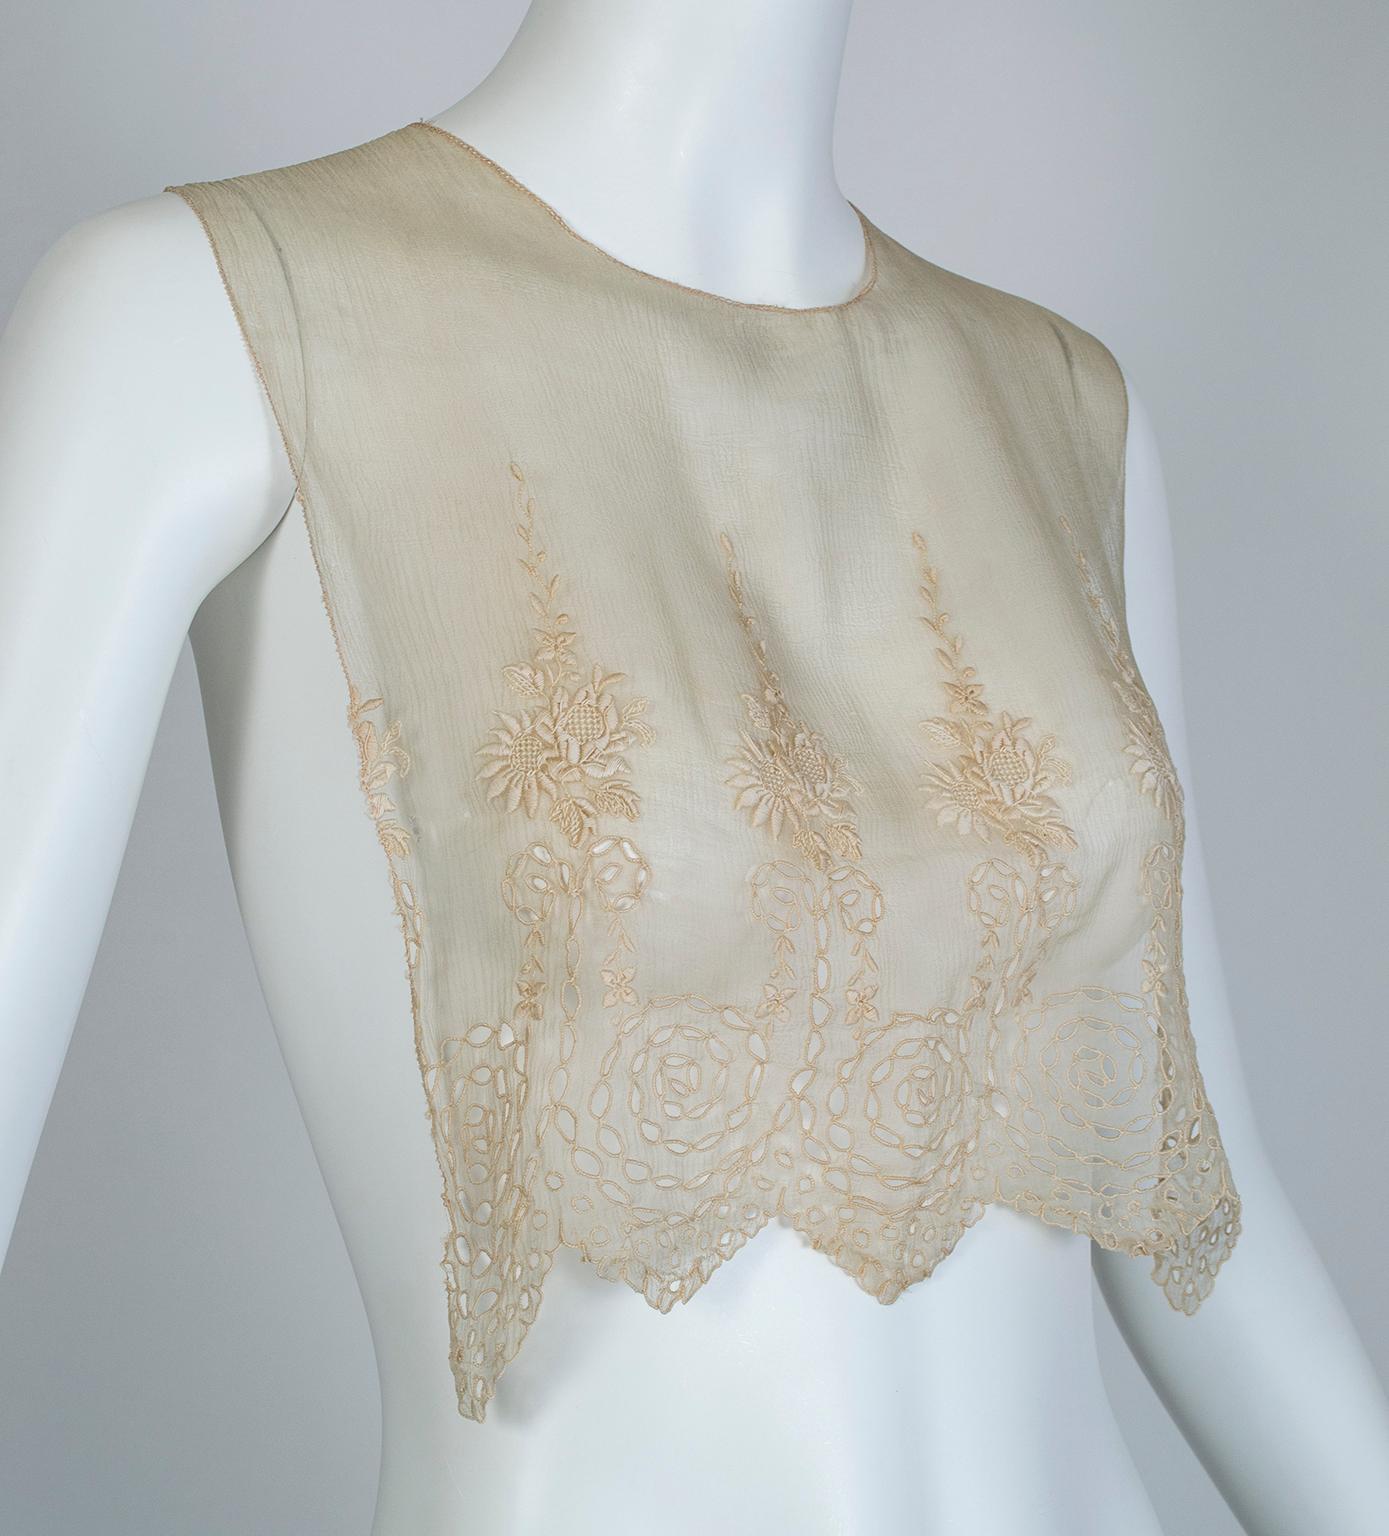 Featuring gossamer lightness and masterful needlework, these two beautiful pieces date from the dawn of the Edwardian Era, when well-bred women took care to cover their décolletage during the day and revealed it for evening. One can see traces of